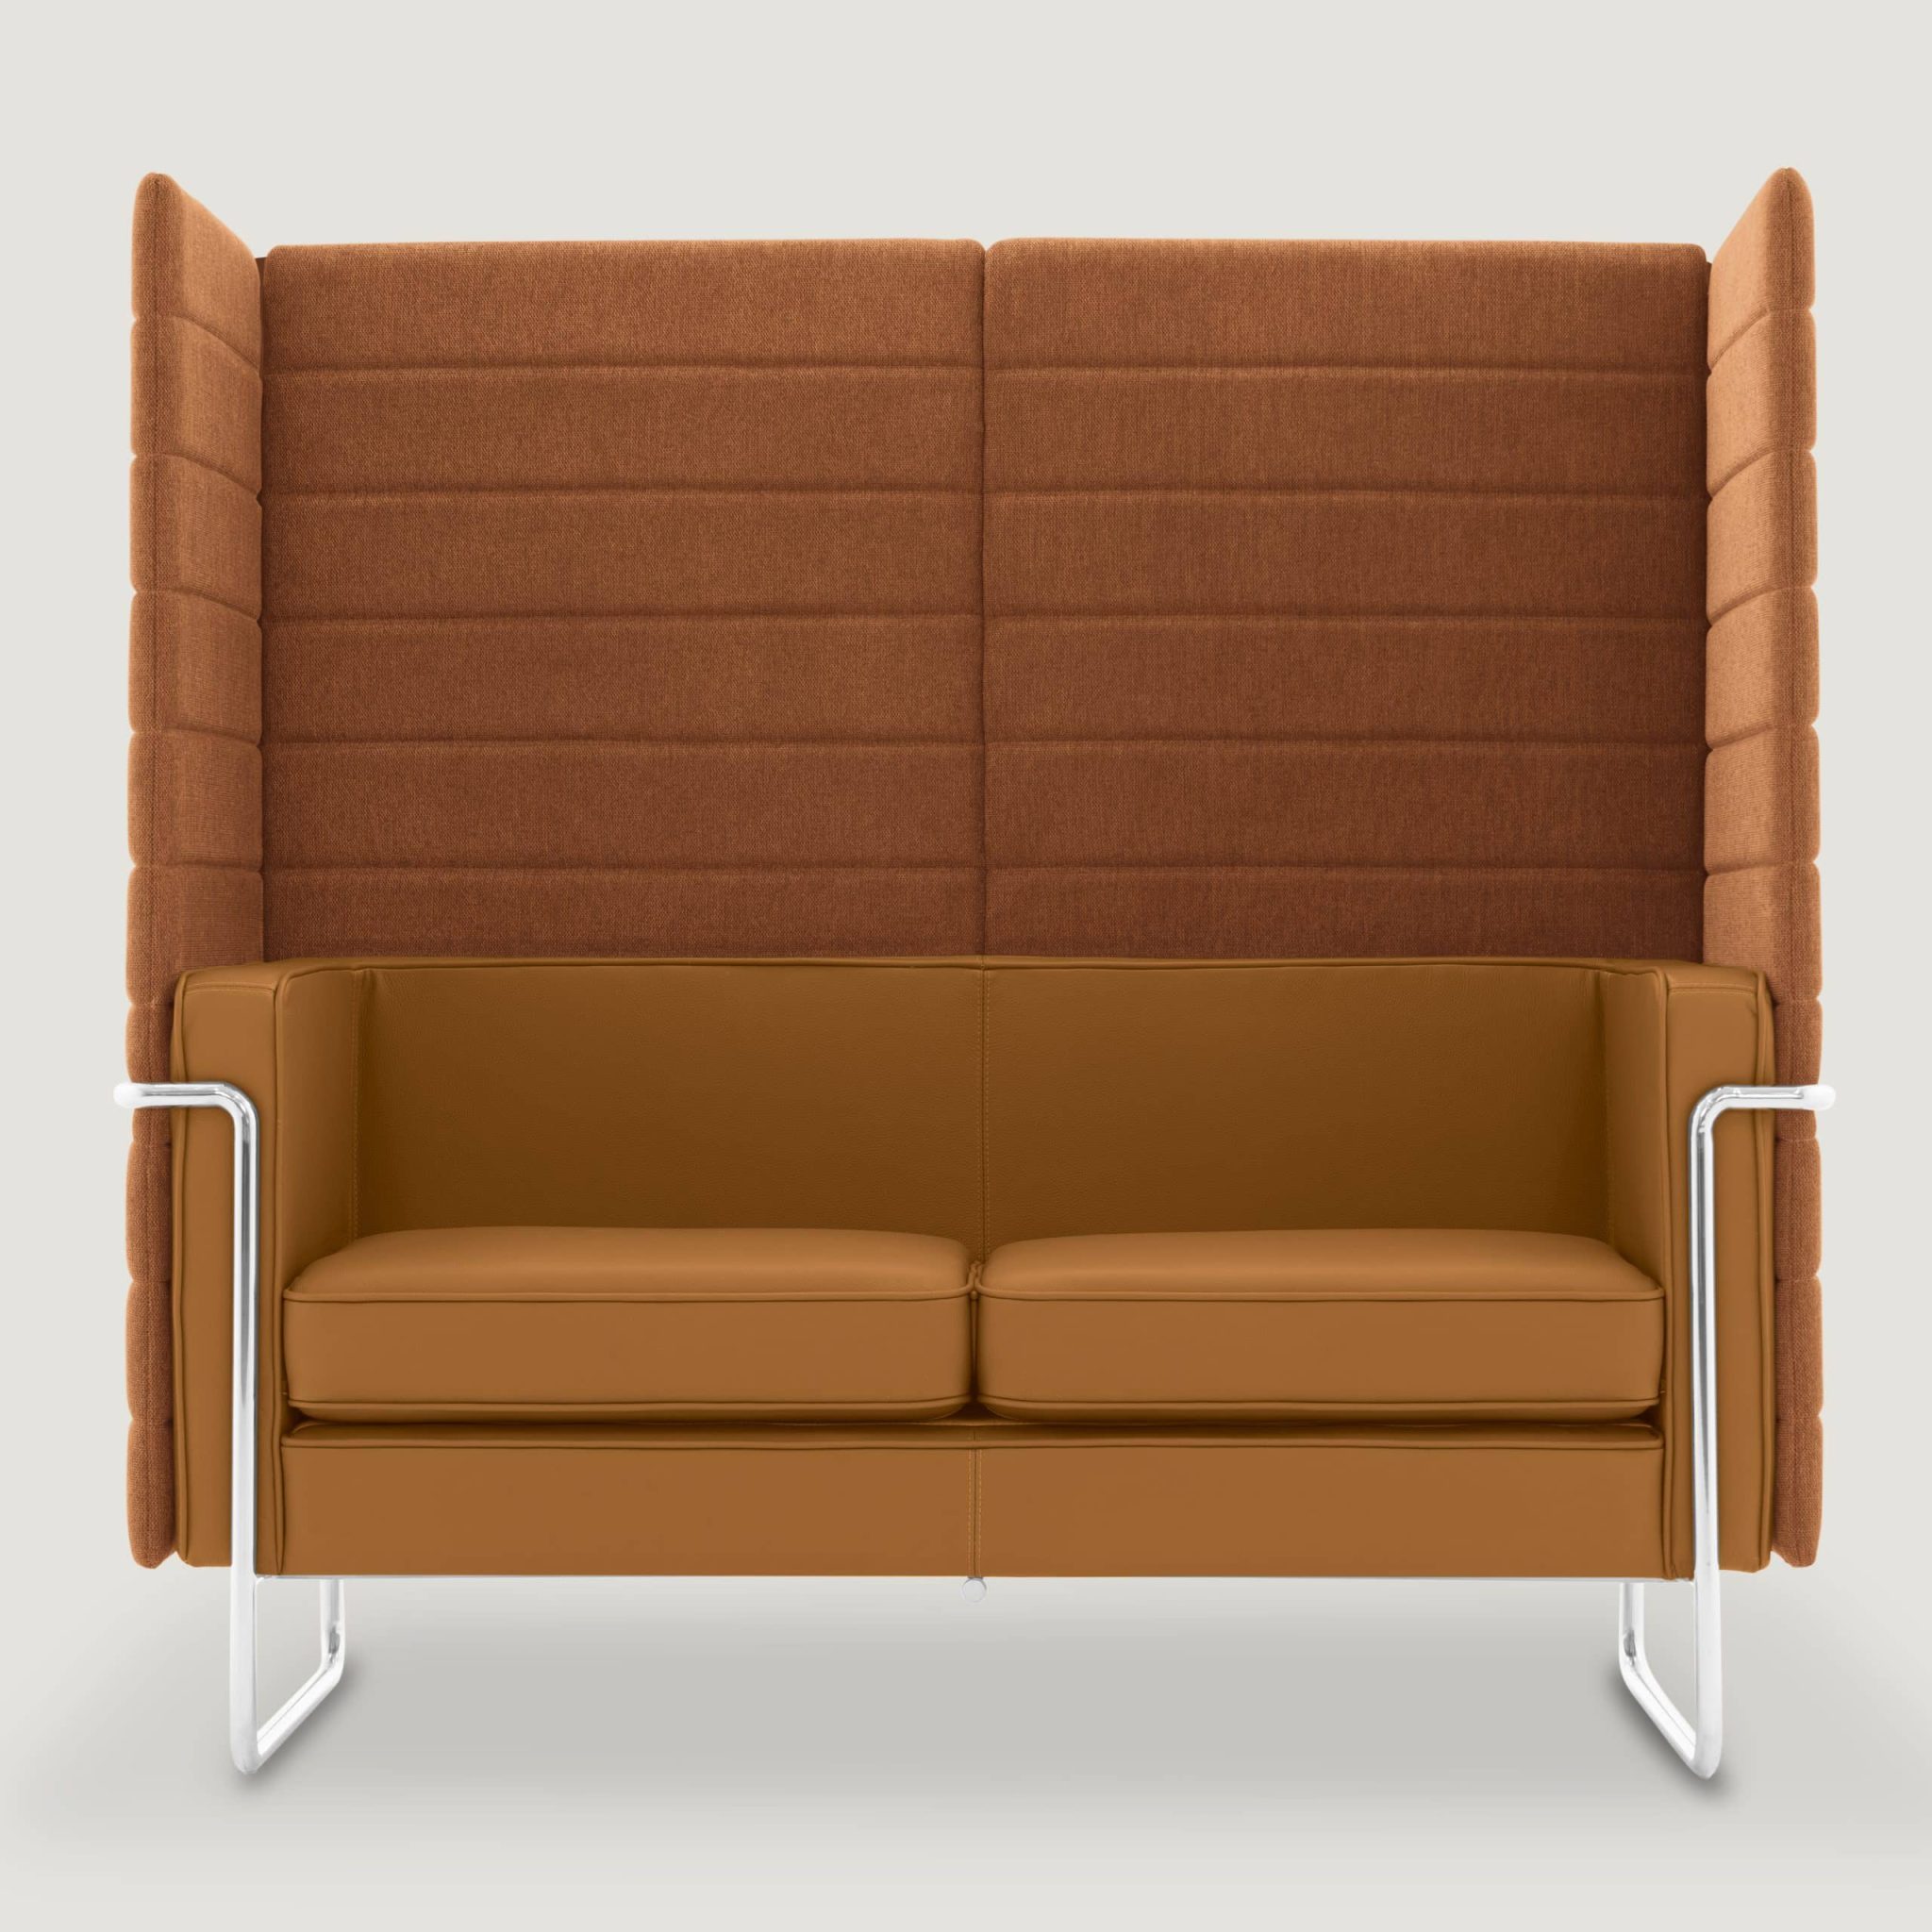 MO 150 Bay Sofa Caramel Brown Leather 1 scaled 1